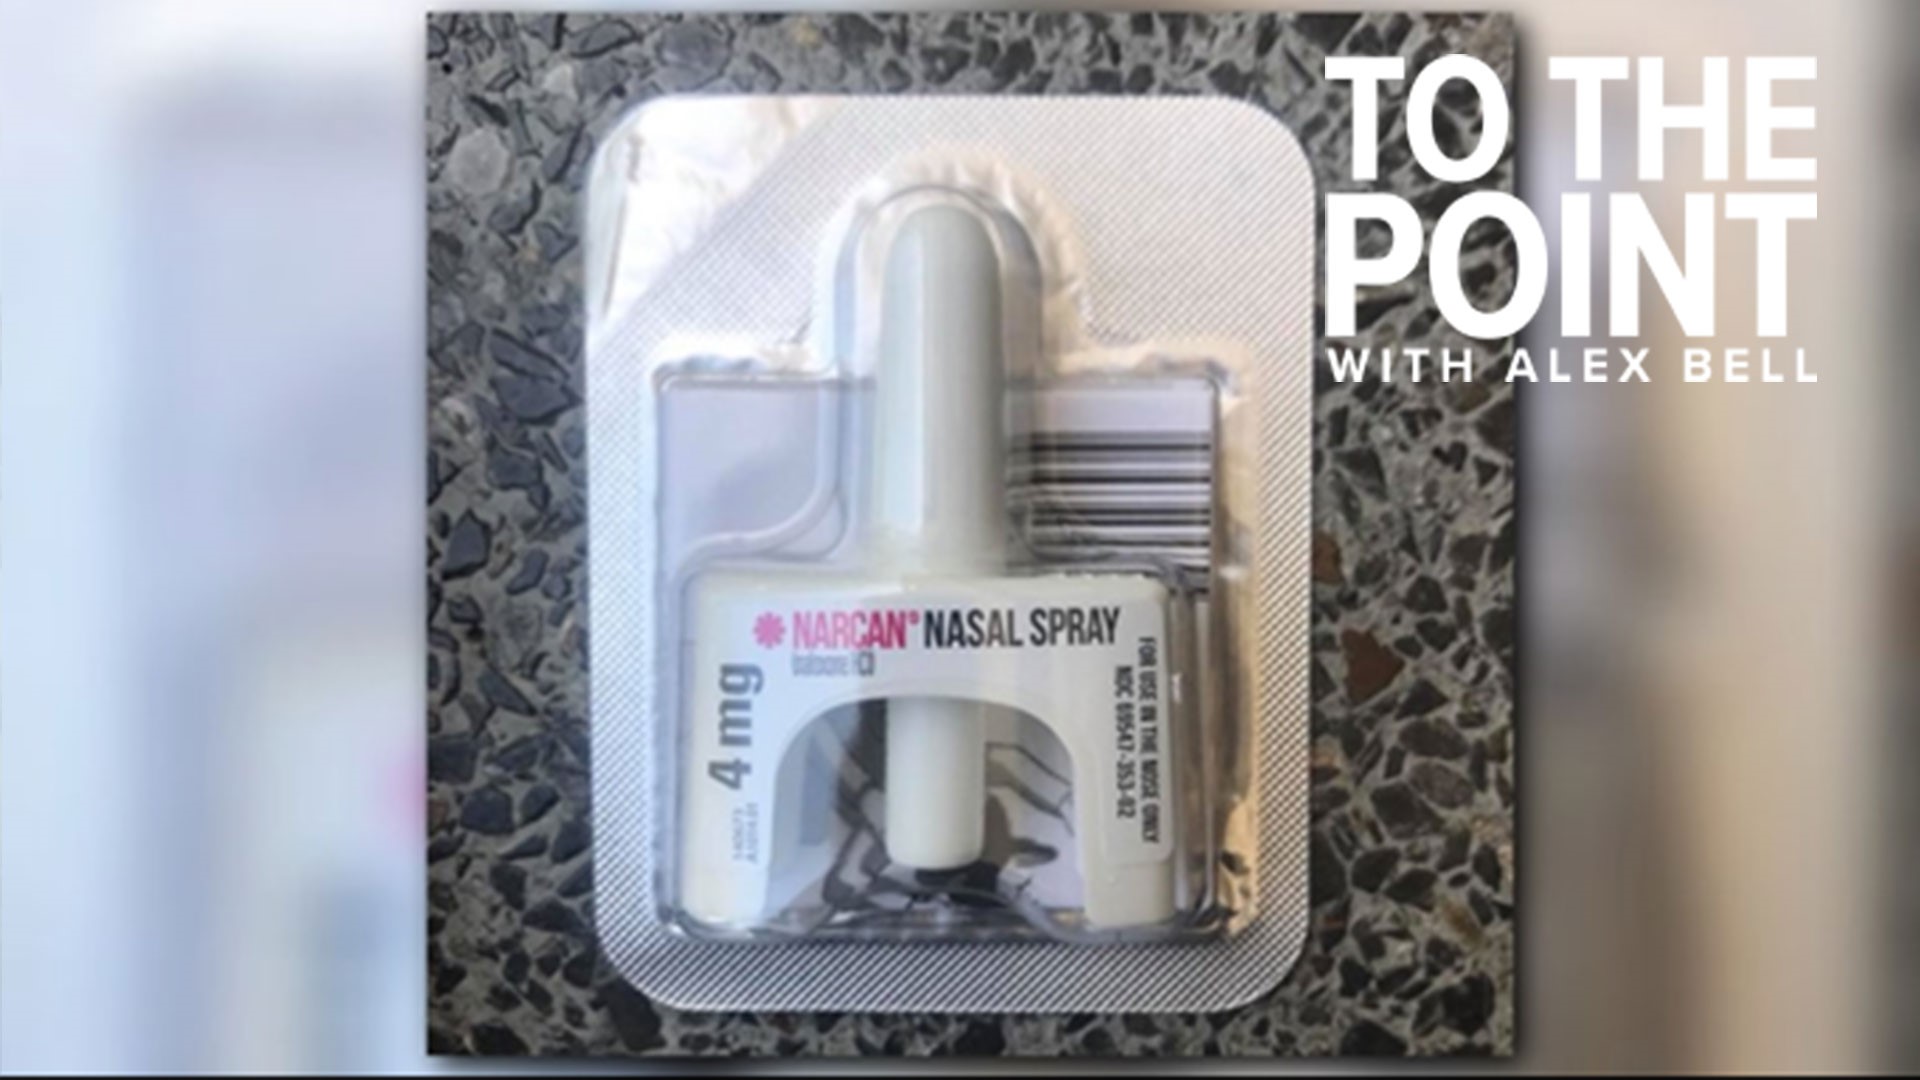 What we know about Fentanyl and Narcan: Your Points  | To The Point